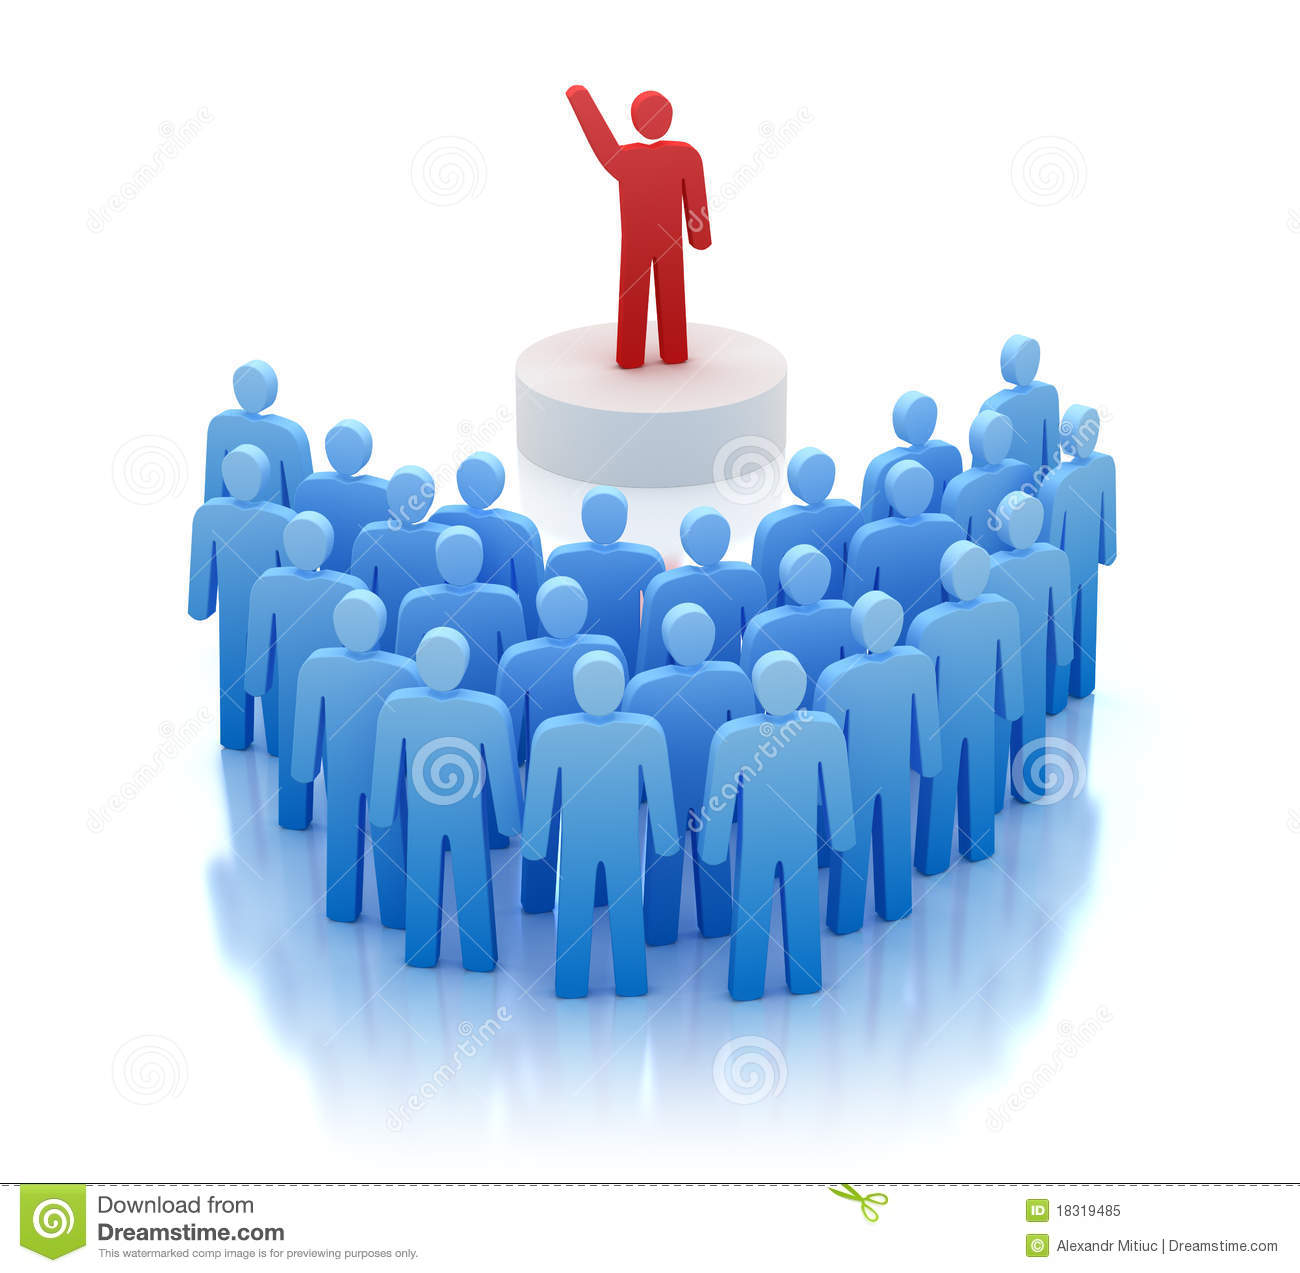 Orator Speaking In Front Of People Royalty Free Stock Photo   Image